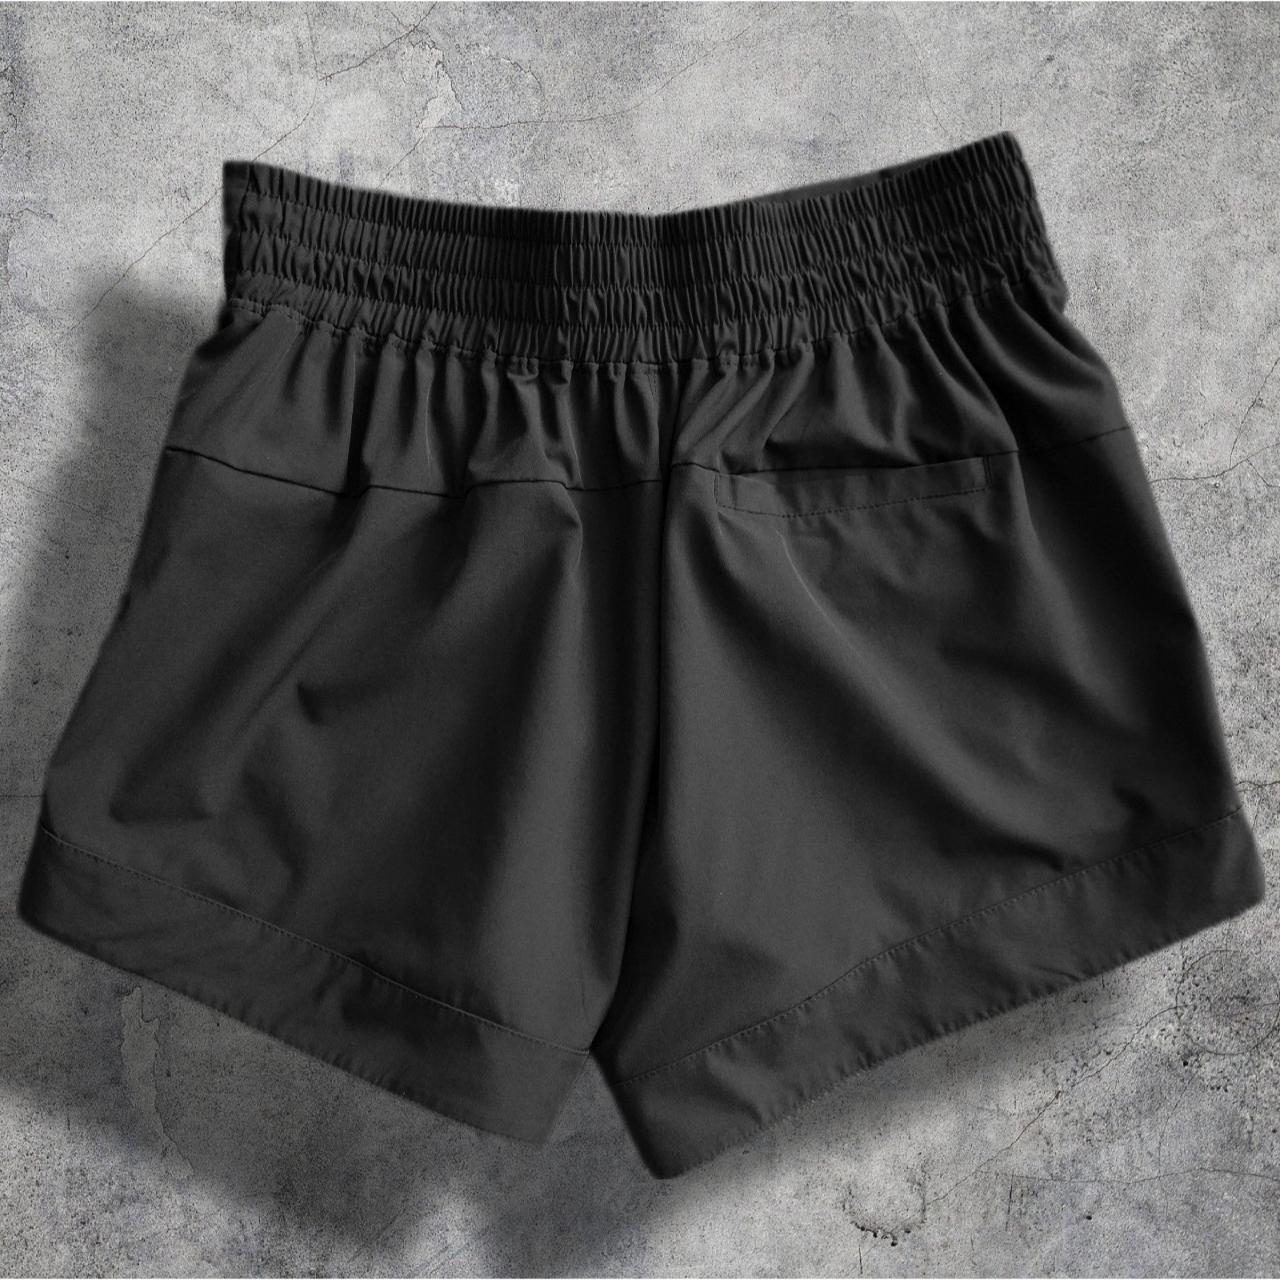 Apana Black Athletic Shorts Women's Small Offers - Depop